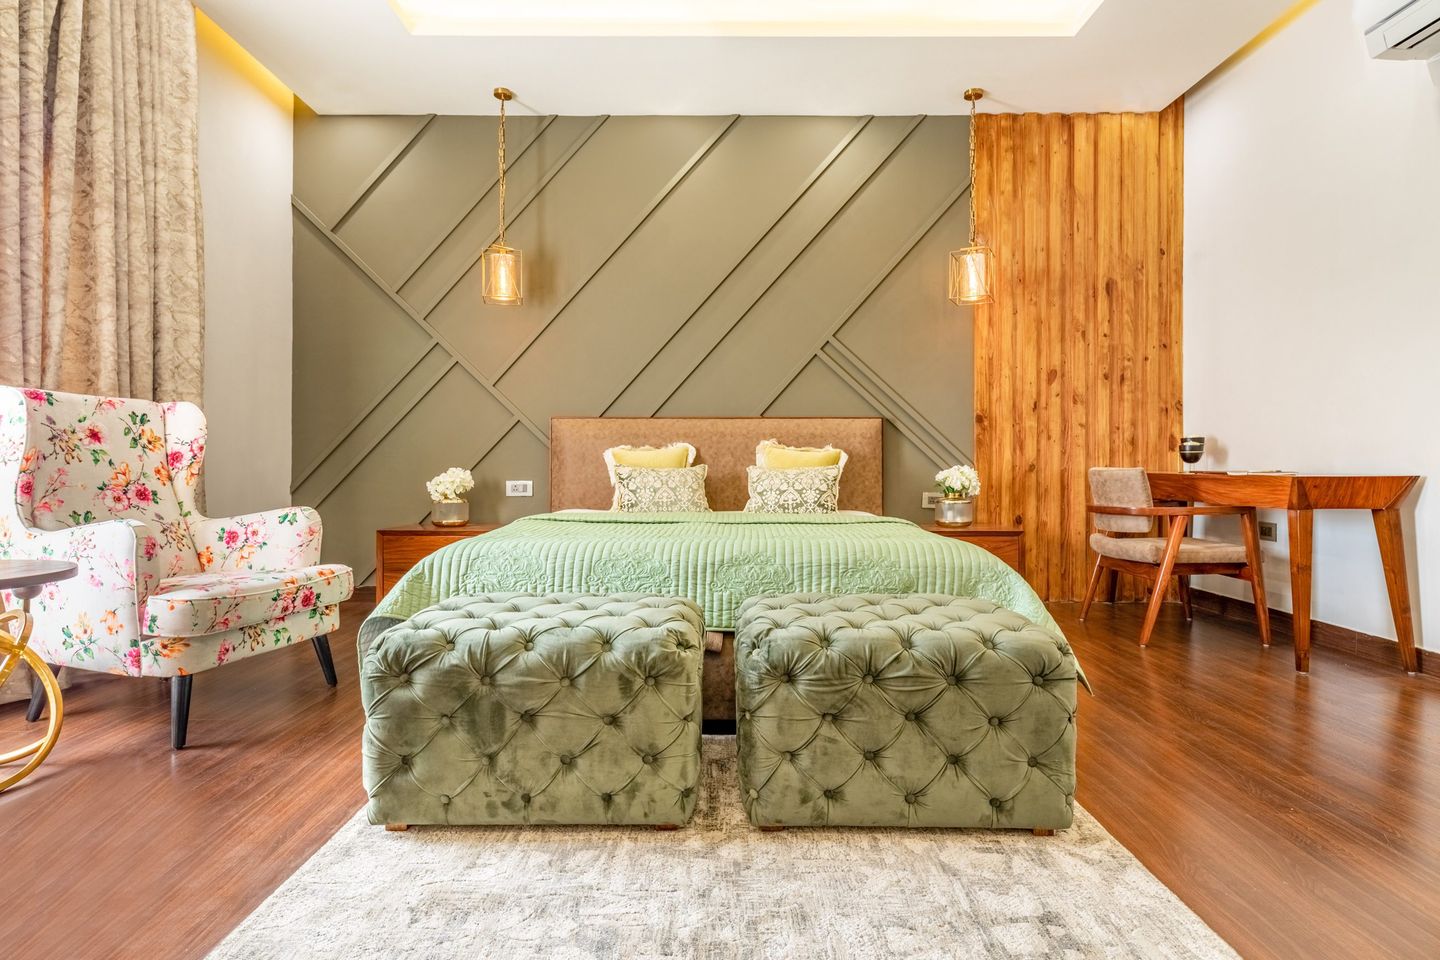 Bedroom Wall Design With Green Panels And Wood Planks - Livspace